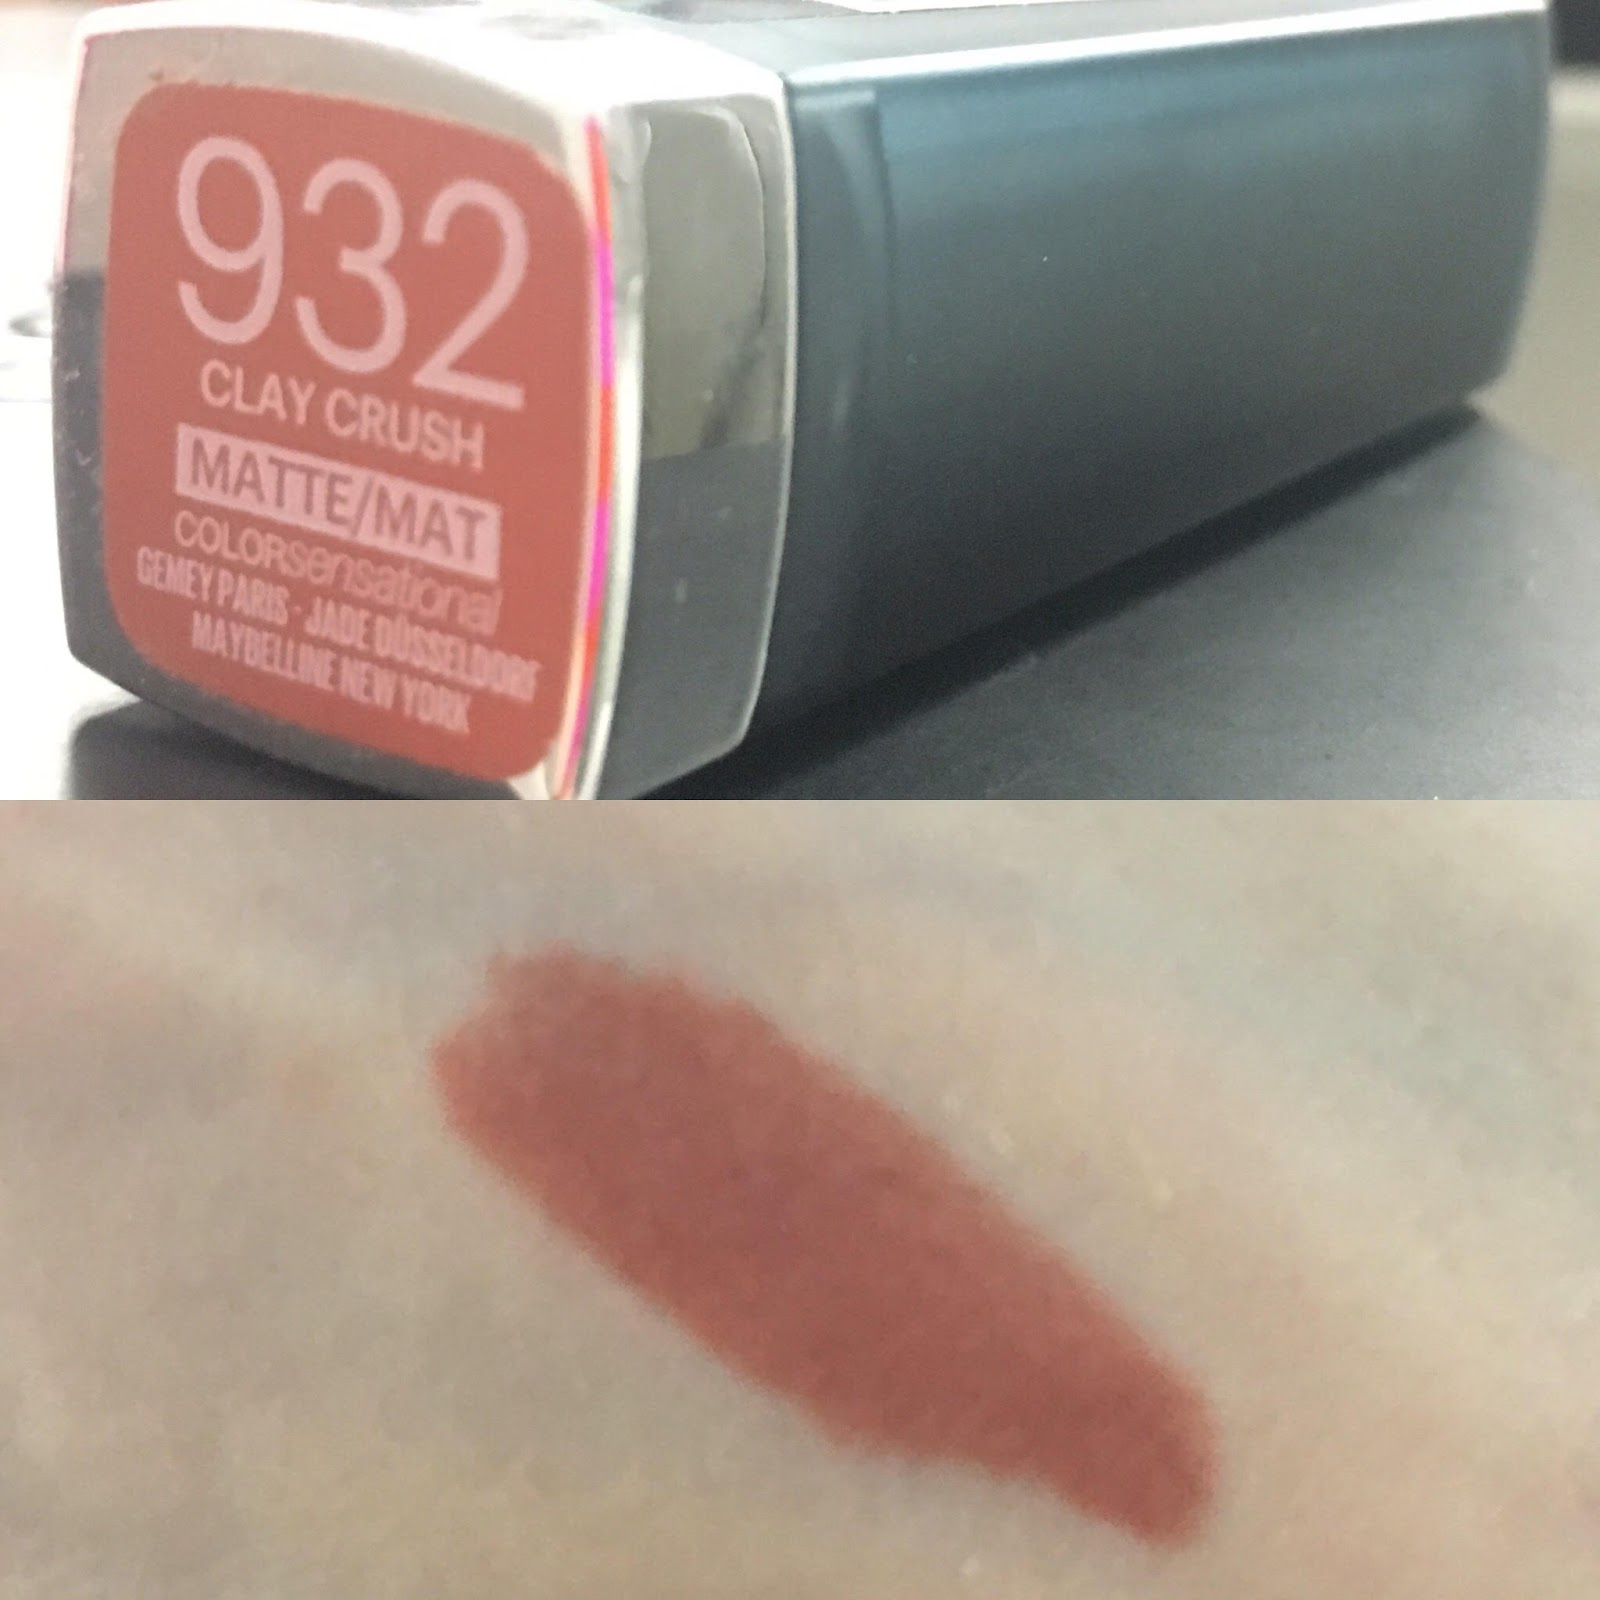 This Maybelline Color Sensational matte lipstick in 'Clay Crush' ...